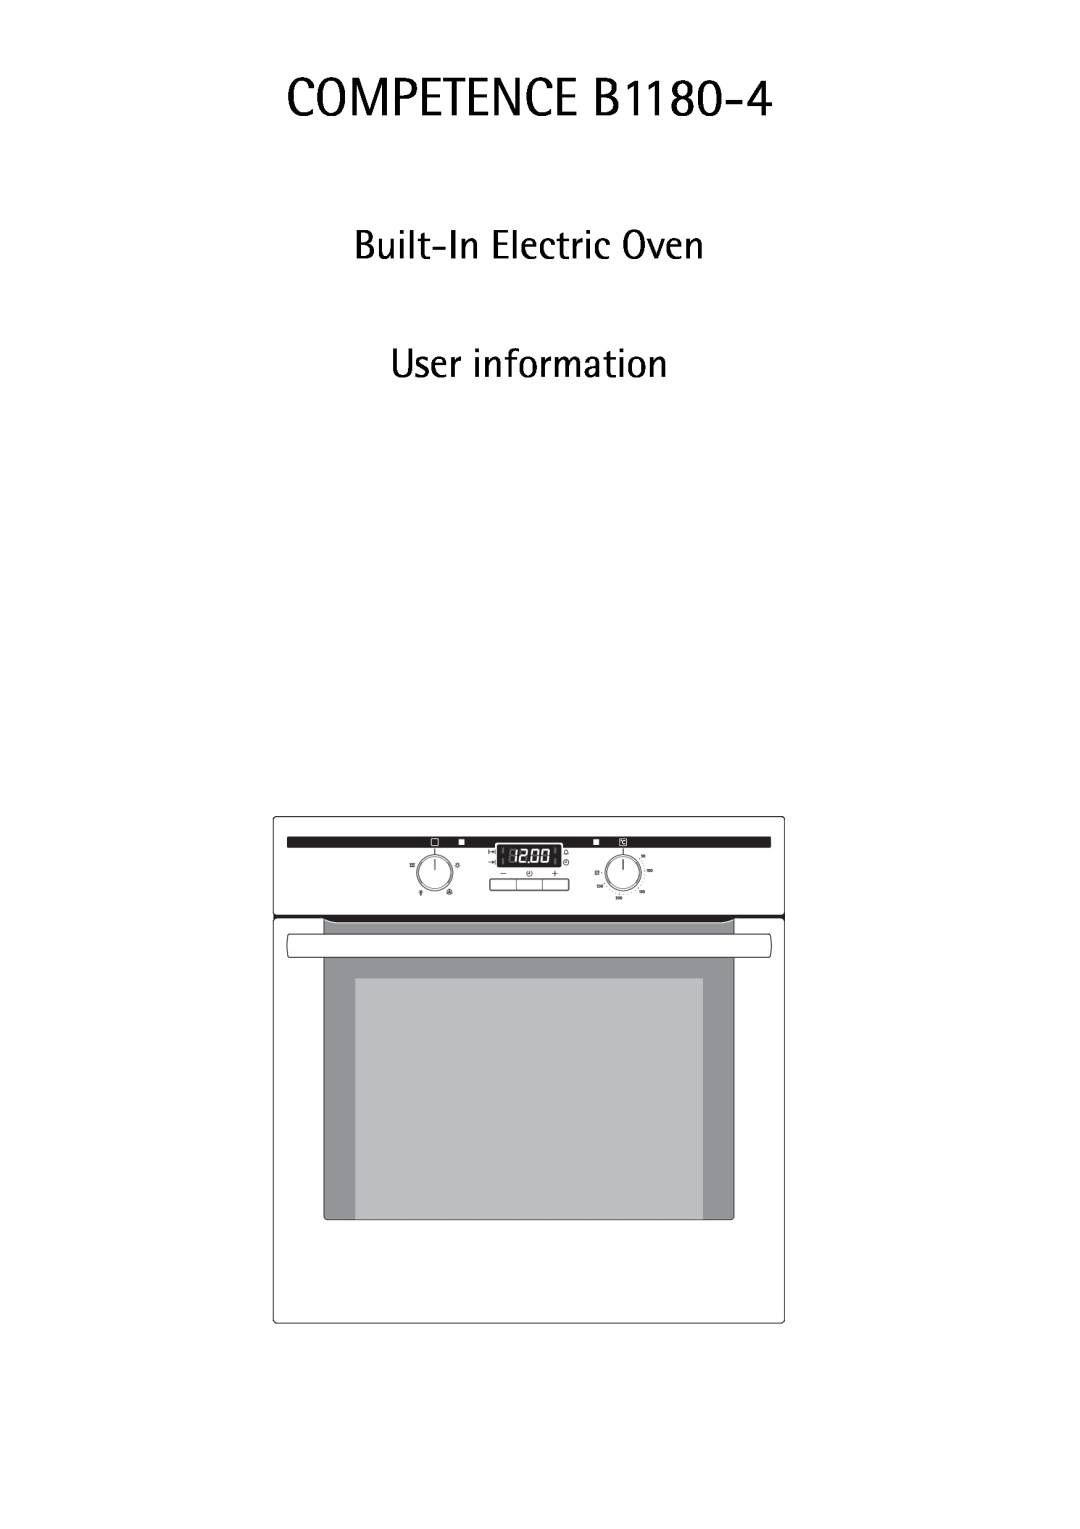 AEG manual COMPETENCE B1180-4, Built-InElectric Oven User information 